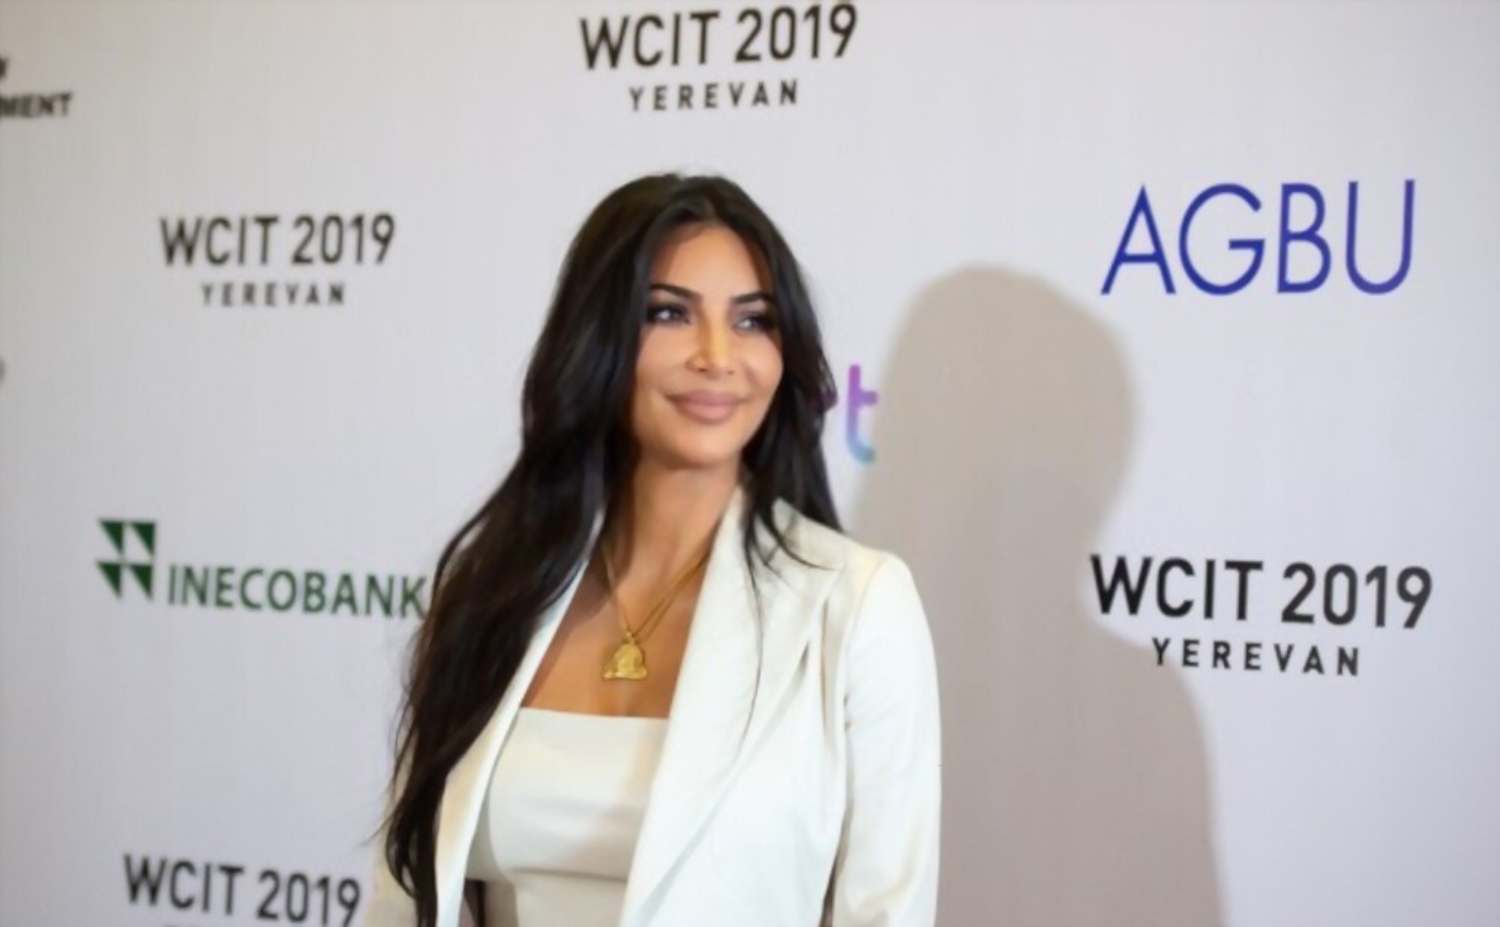 Kim Kardashian Pays $12.6M Fine to the SEC for Promoting a Crypto Security